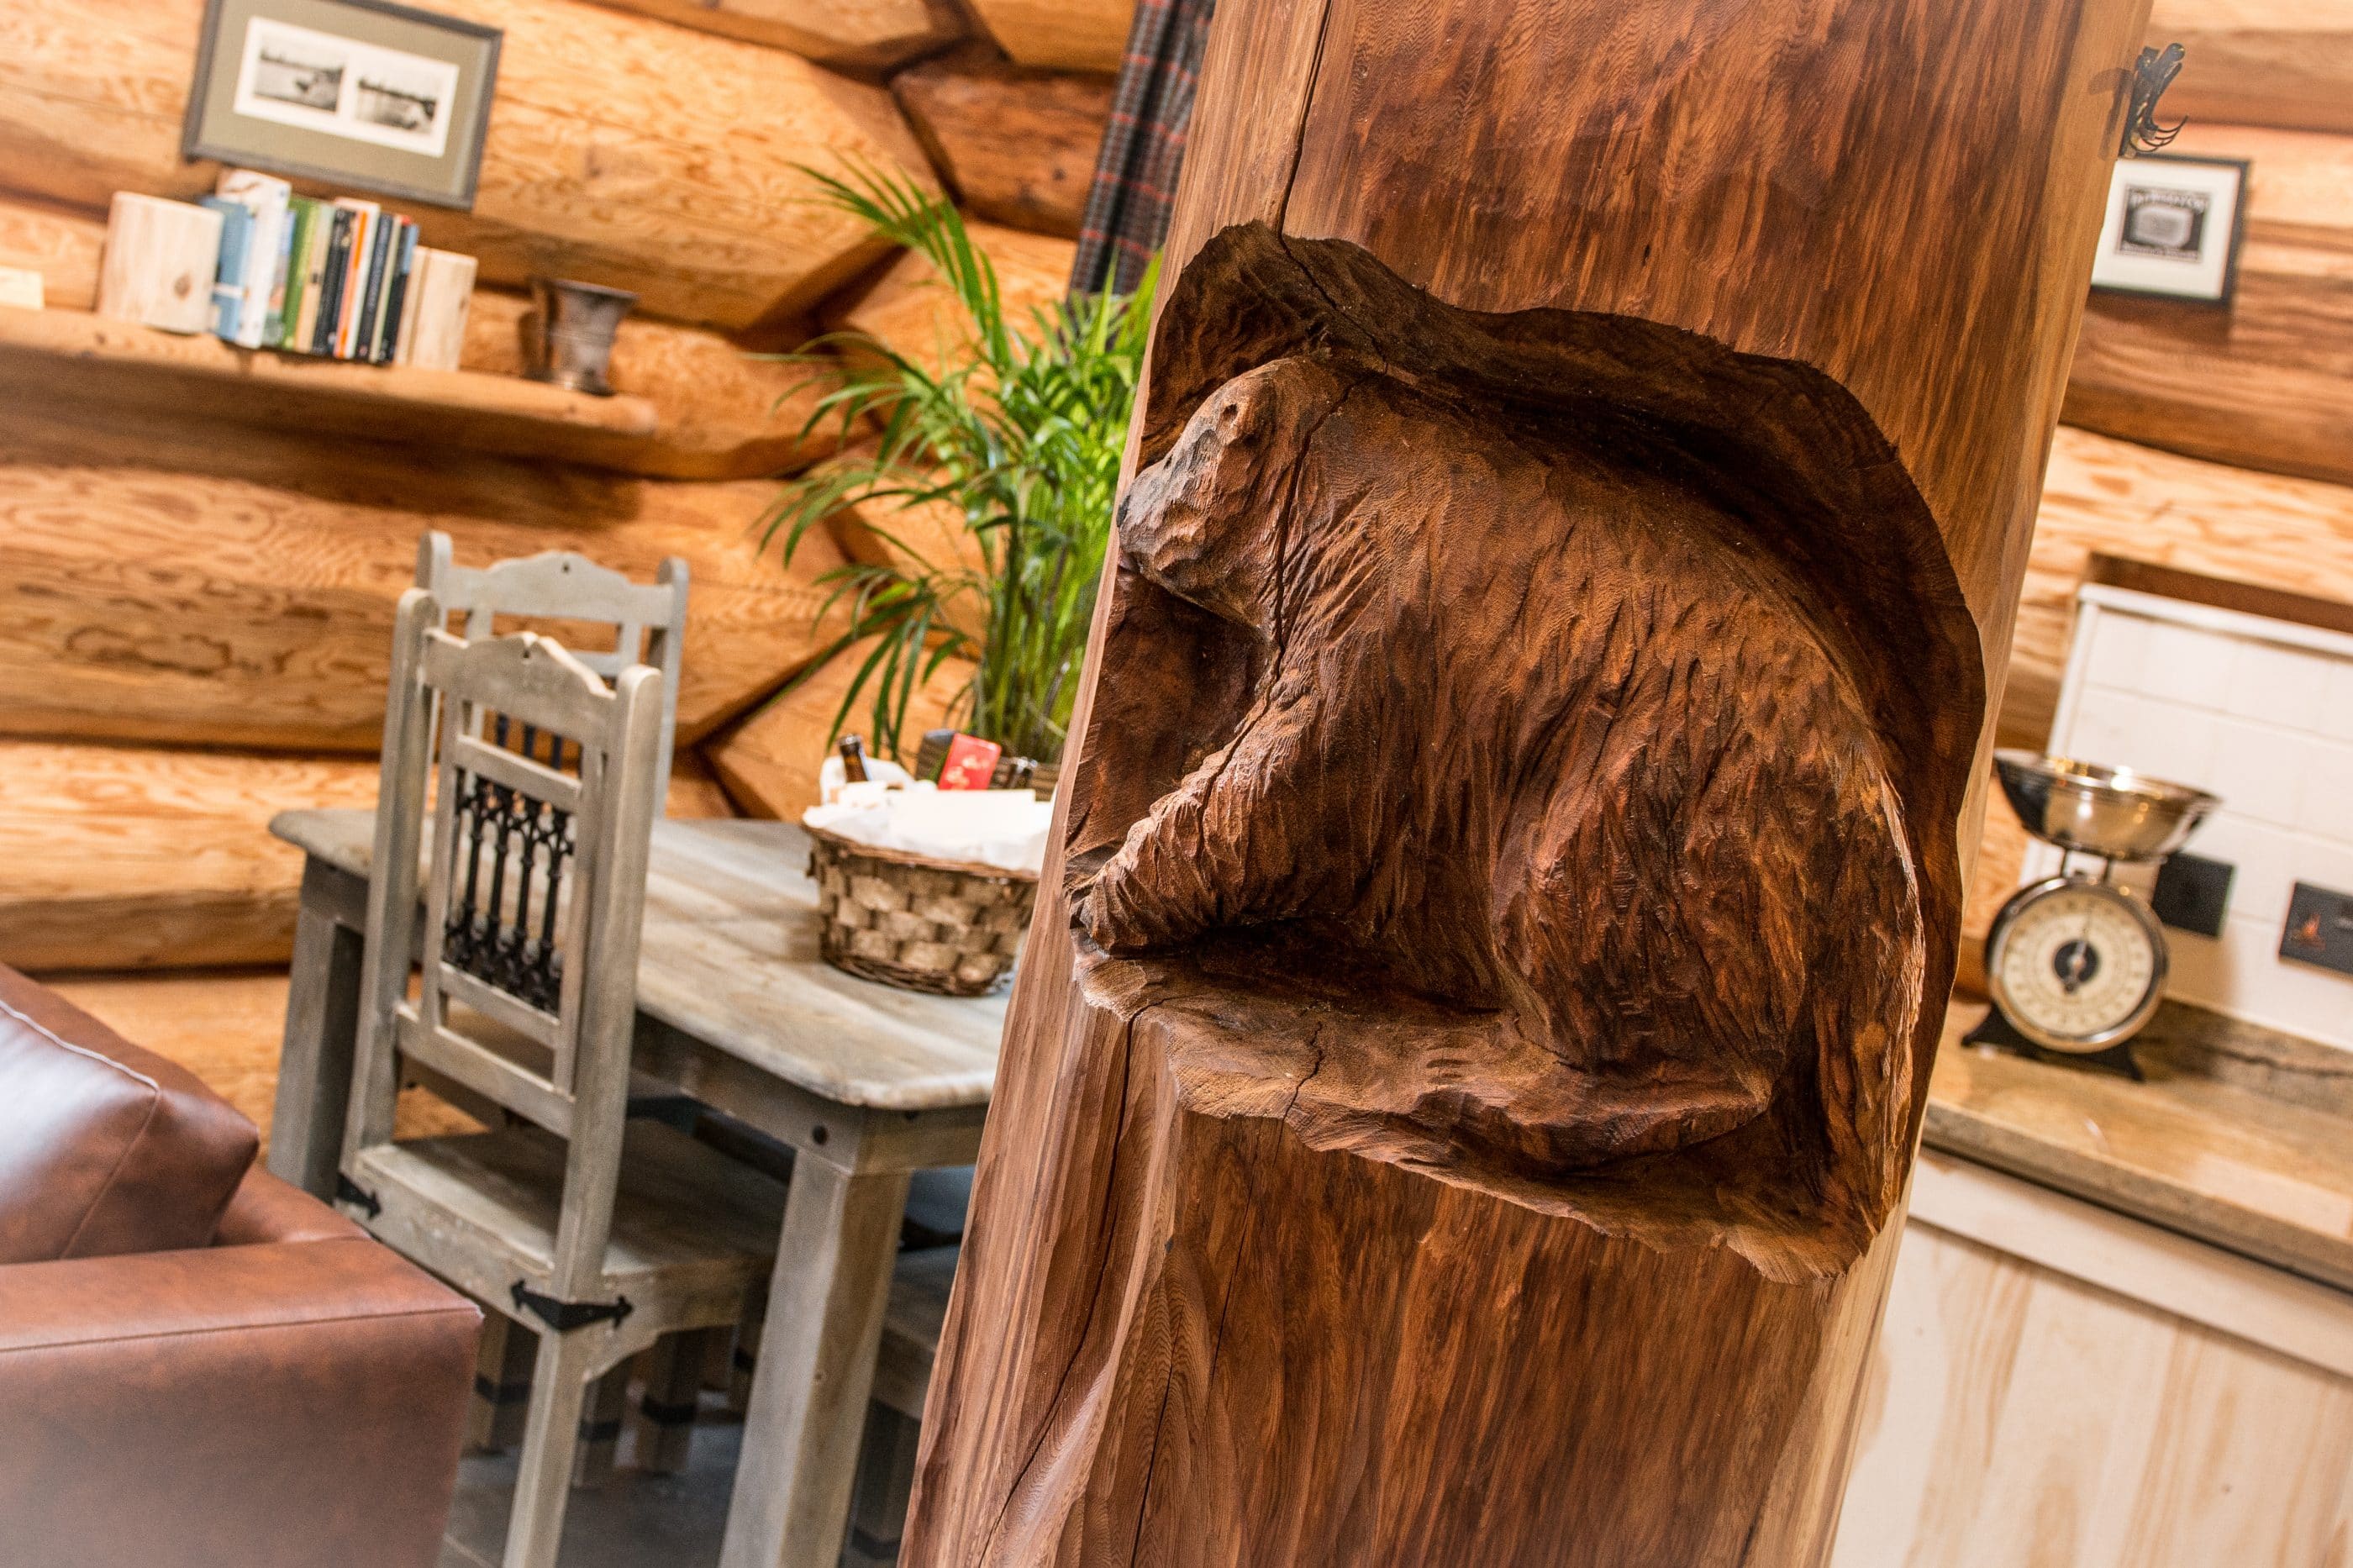 A wood carving of a bear in Tringa log cabin